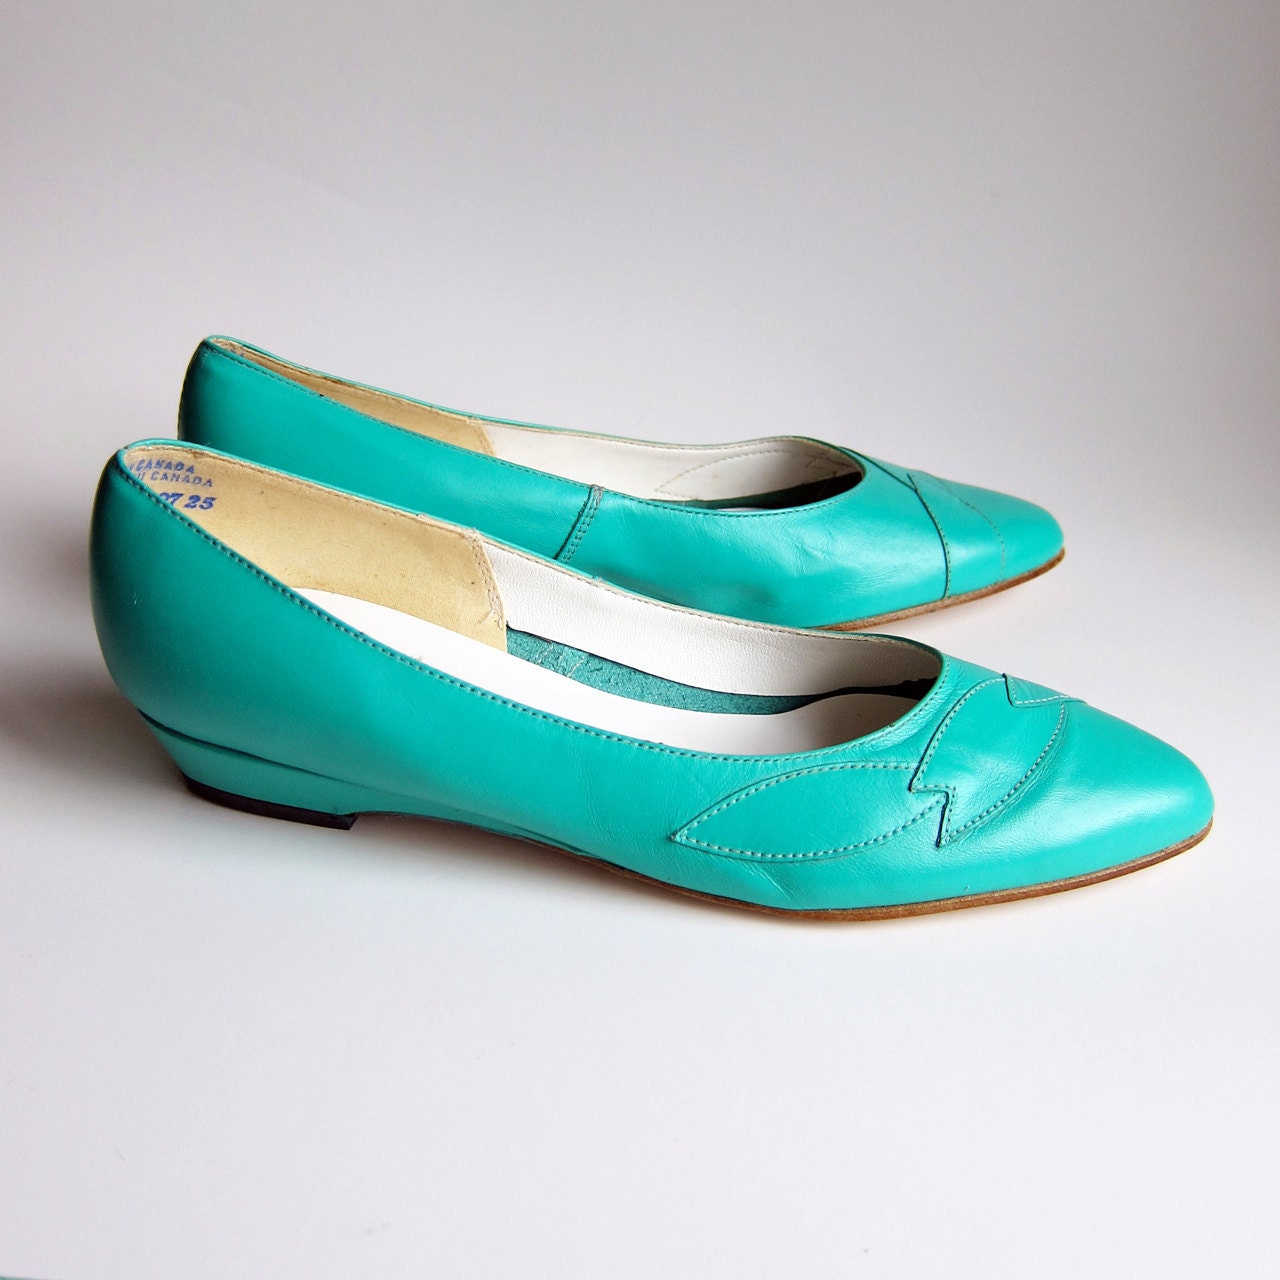 Vintage 1980s Shoes  TURQUOISE SEAFOAM GREEN Skimmers Ballet Flats ...